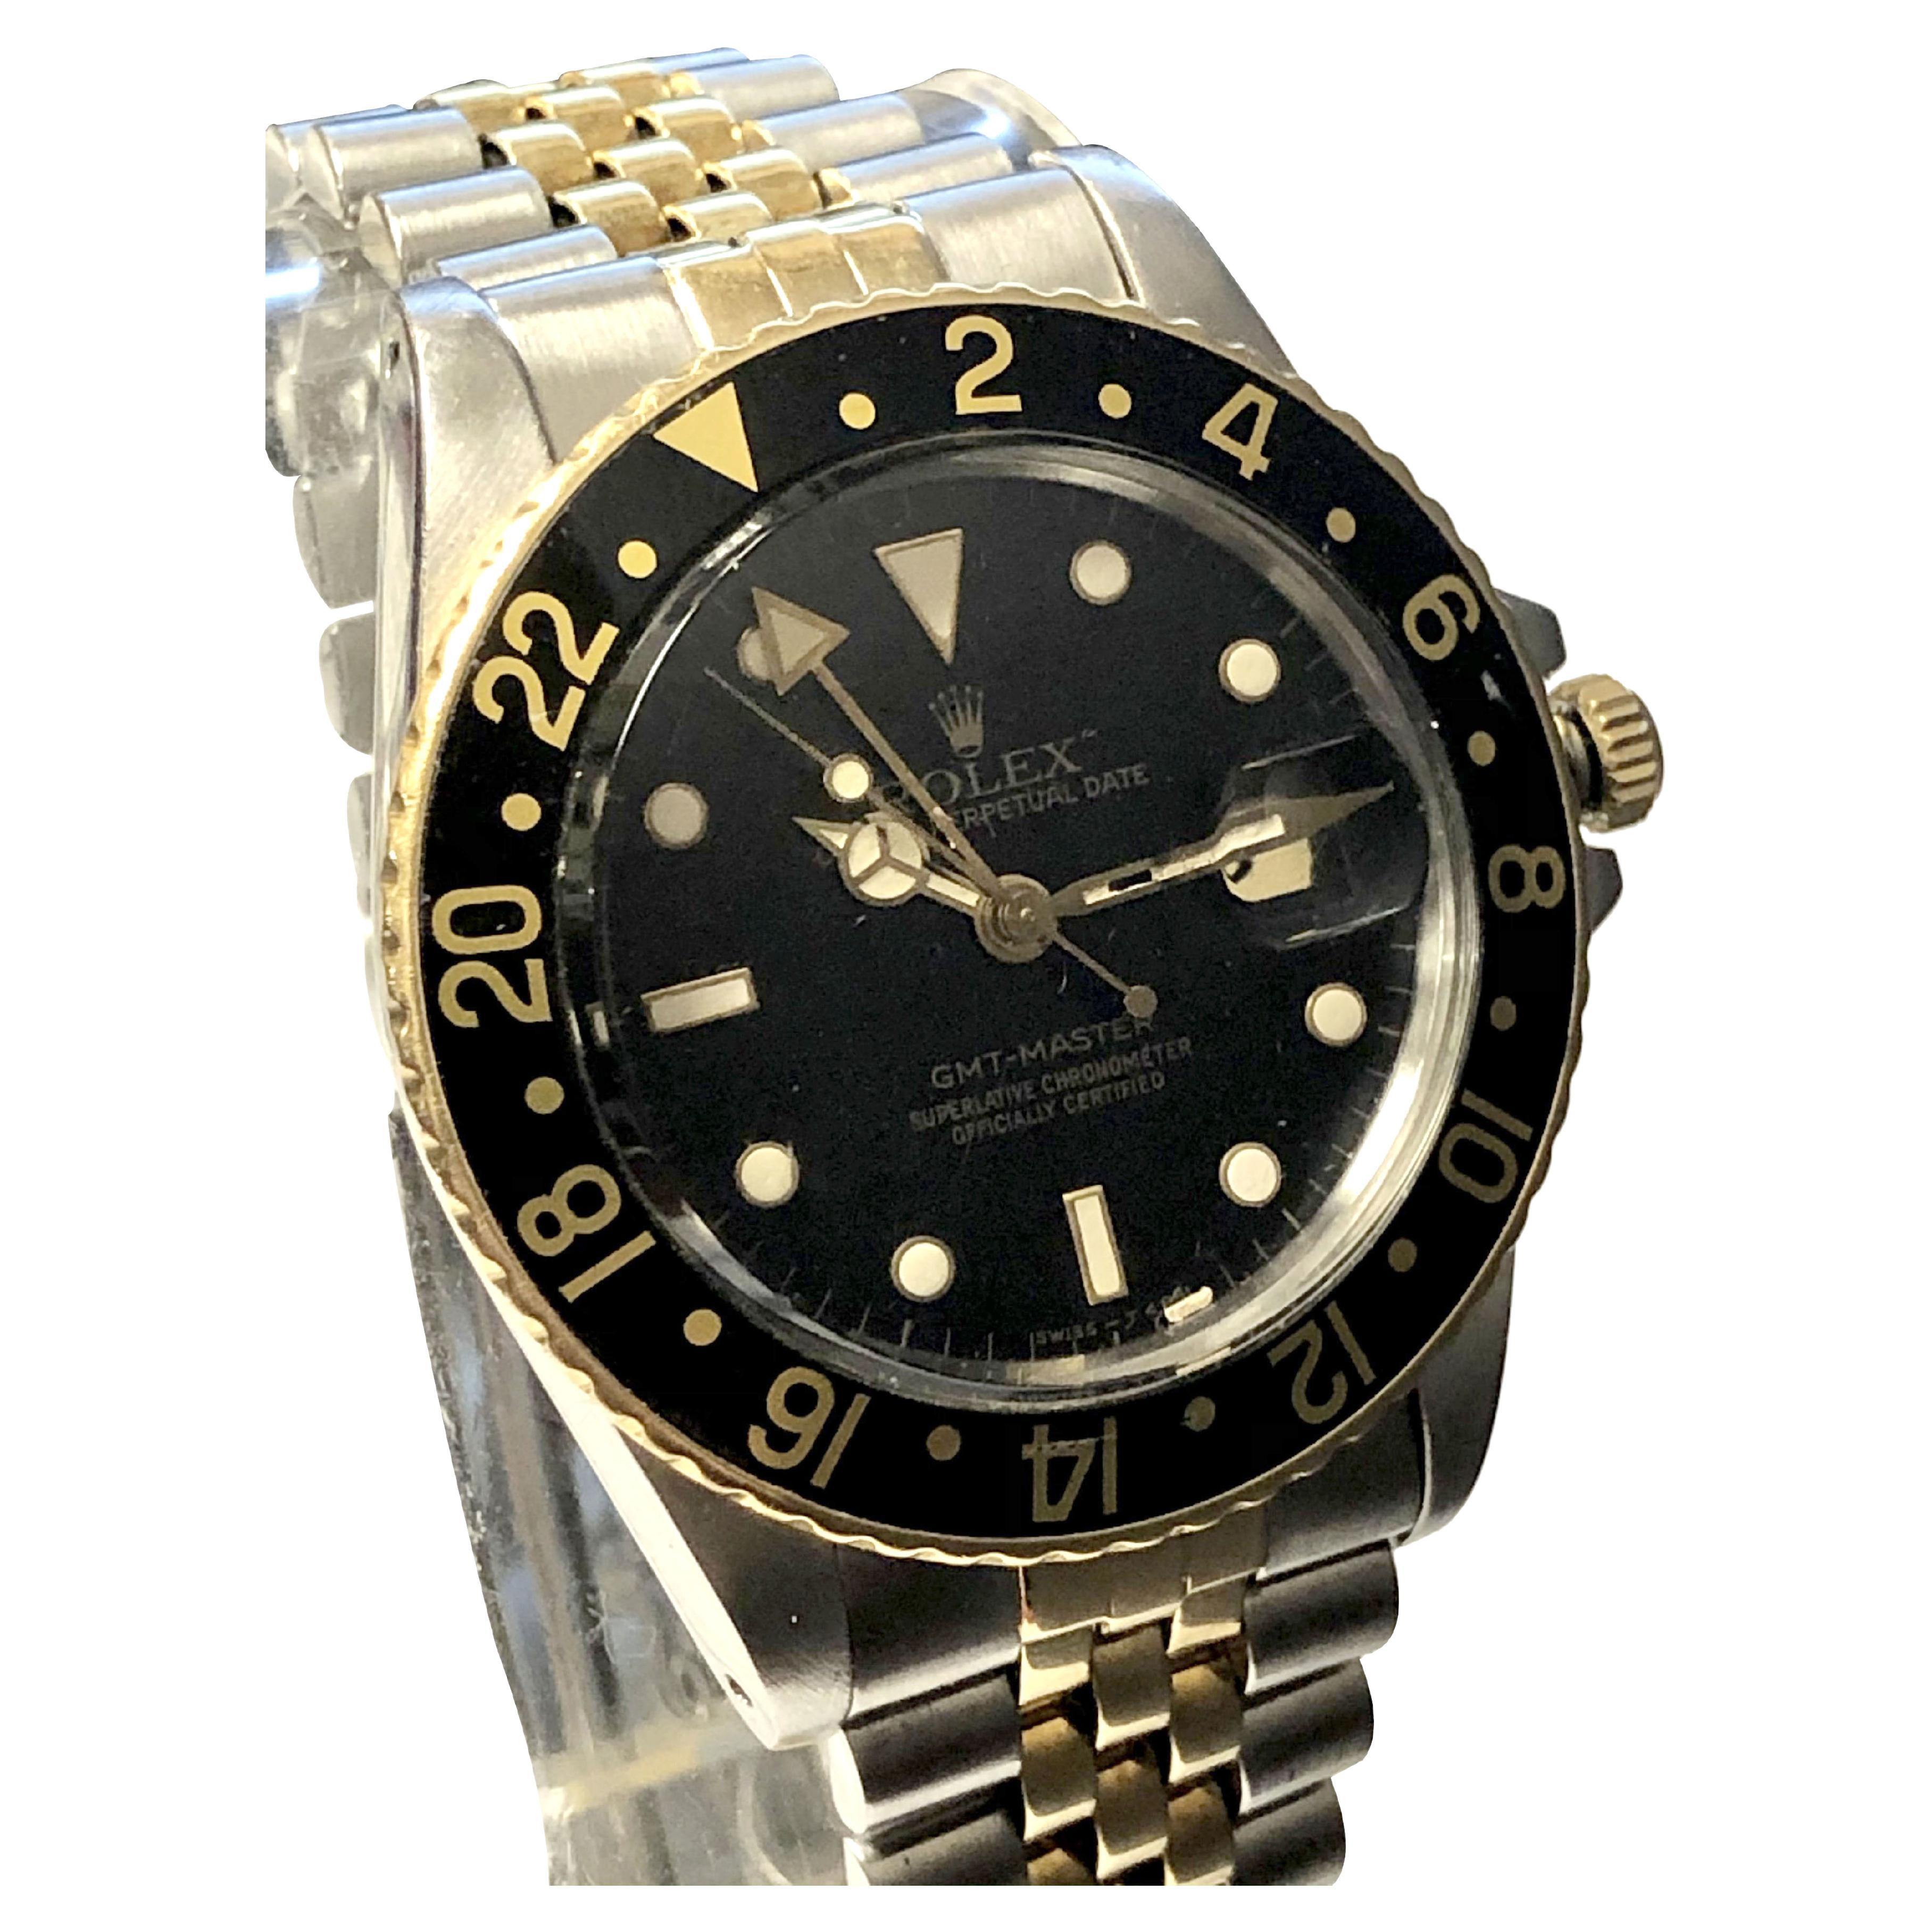 Circa 1985 Rolex GMT, Reference 16753, 40 M.M. Stainless Steel 3 piece Oyster Case with 14K 24 Hour Rotating Bezel, Original insert, Acrylic Crystal with Date Bubble. Caliber 3075, 27 jewel Automatic Self winding movement.  Original Black dial with